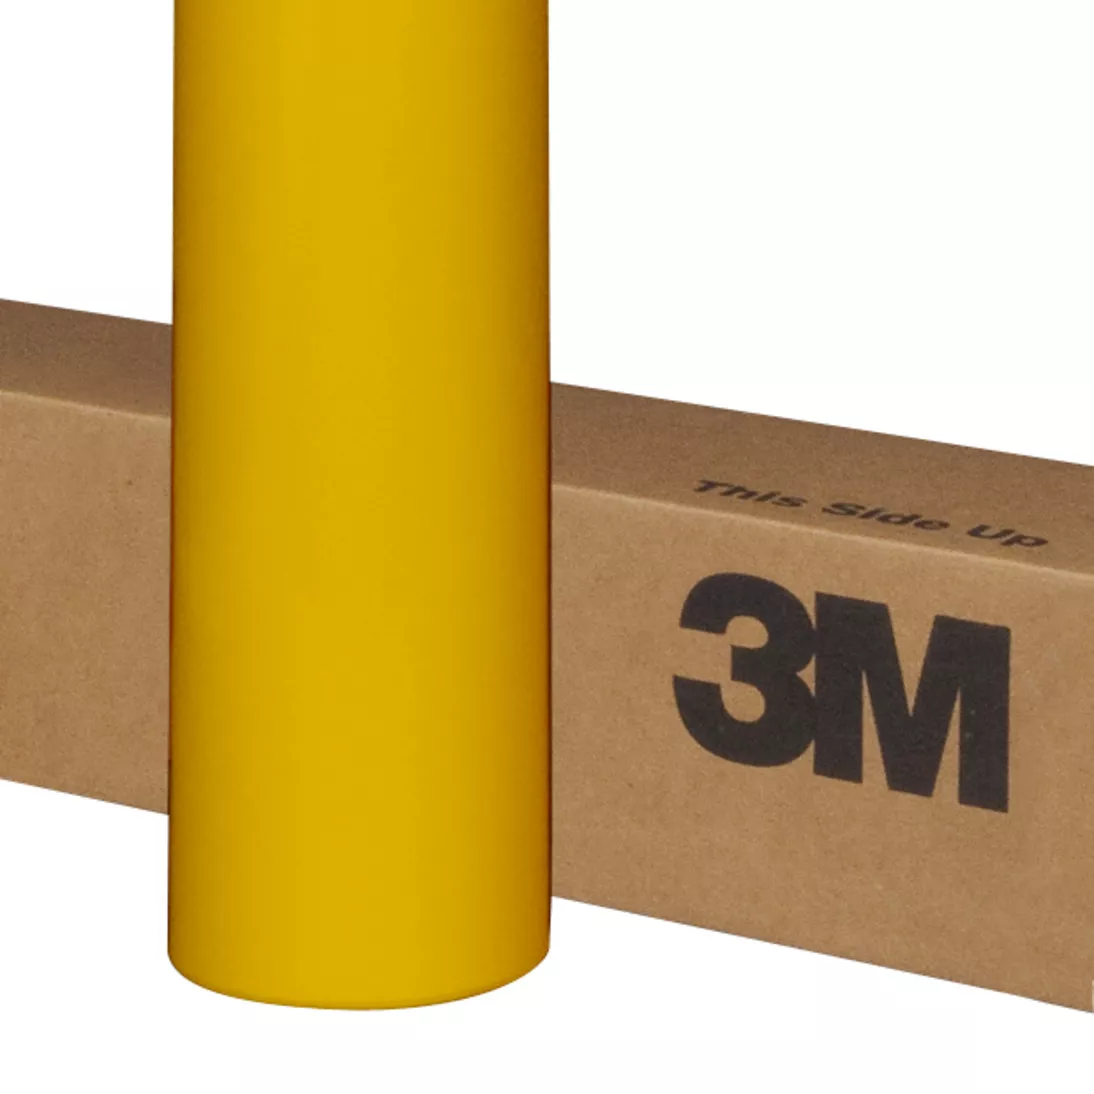 3M™ Scotchlite™ Reflective Graphic Film 680-71, Yellow, 48 in x 50 yd, 1
Roll/Case